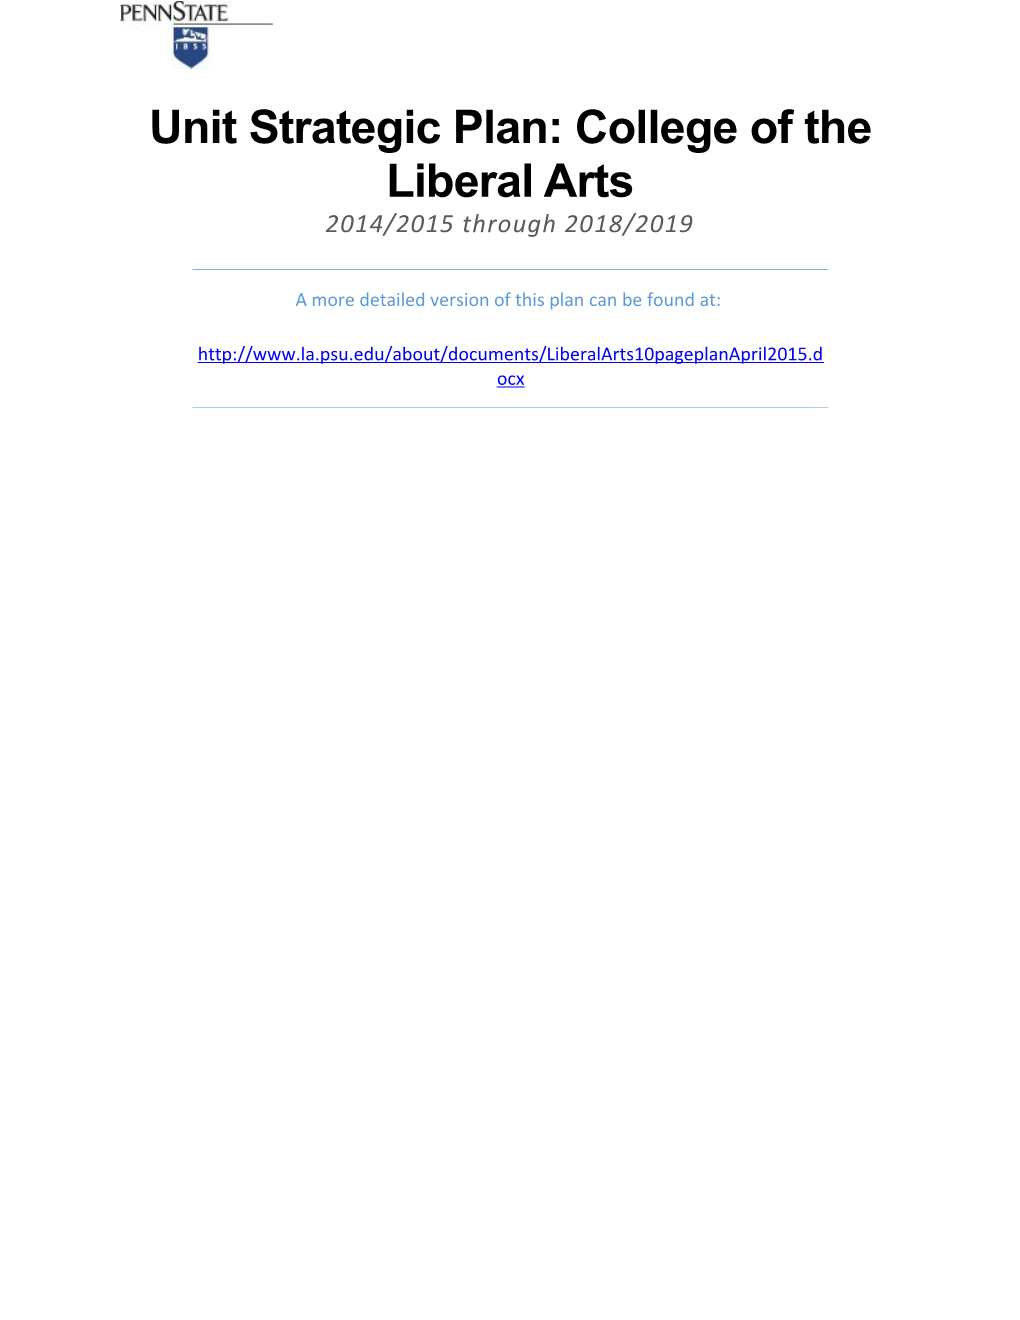 Penn State College of the Liberal Arts Strategic Plan